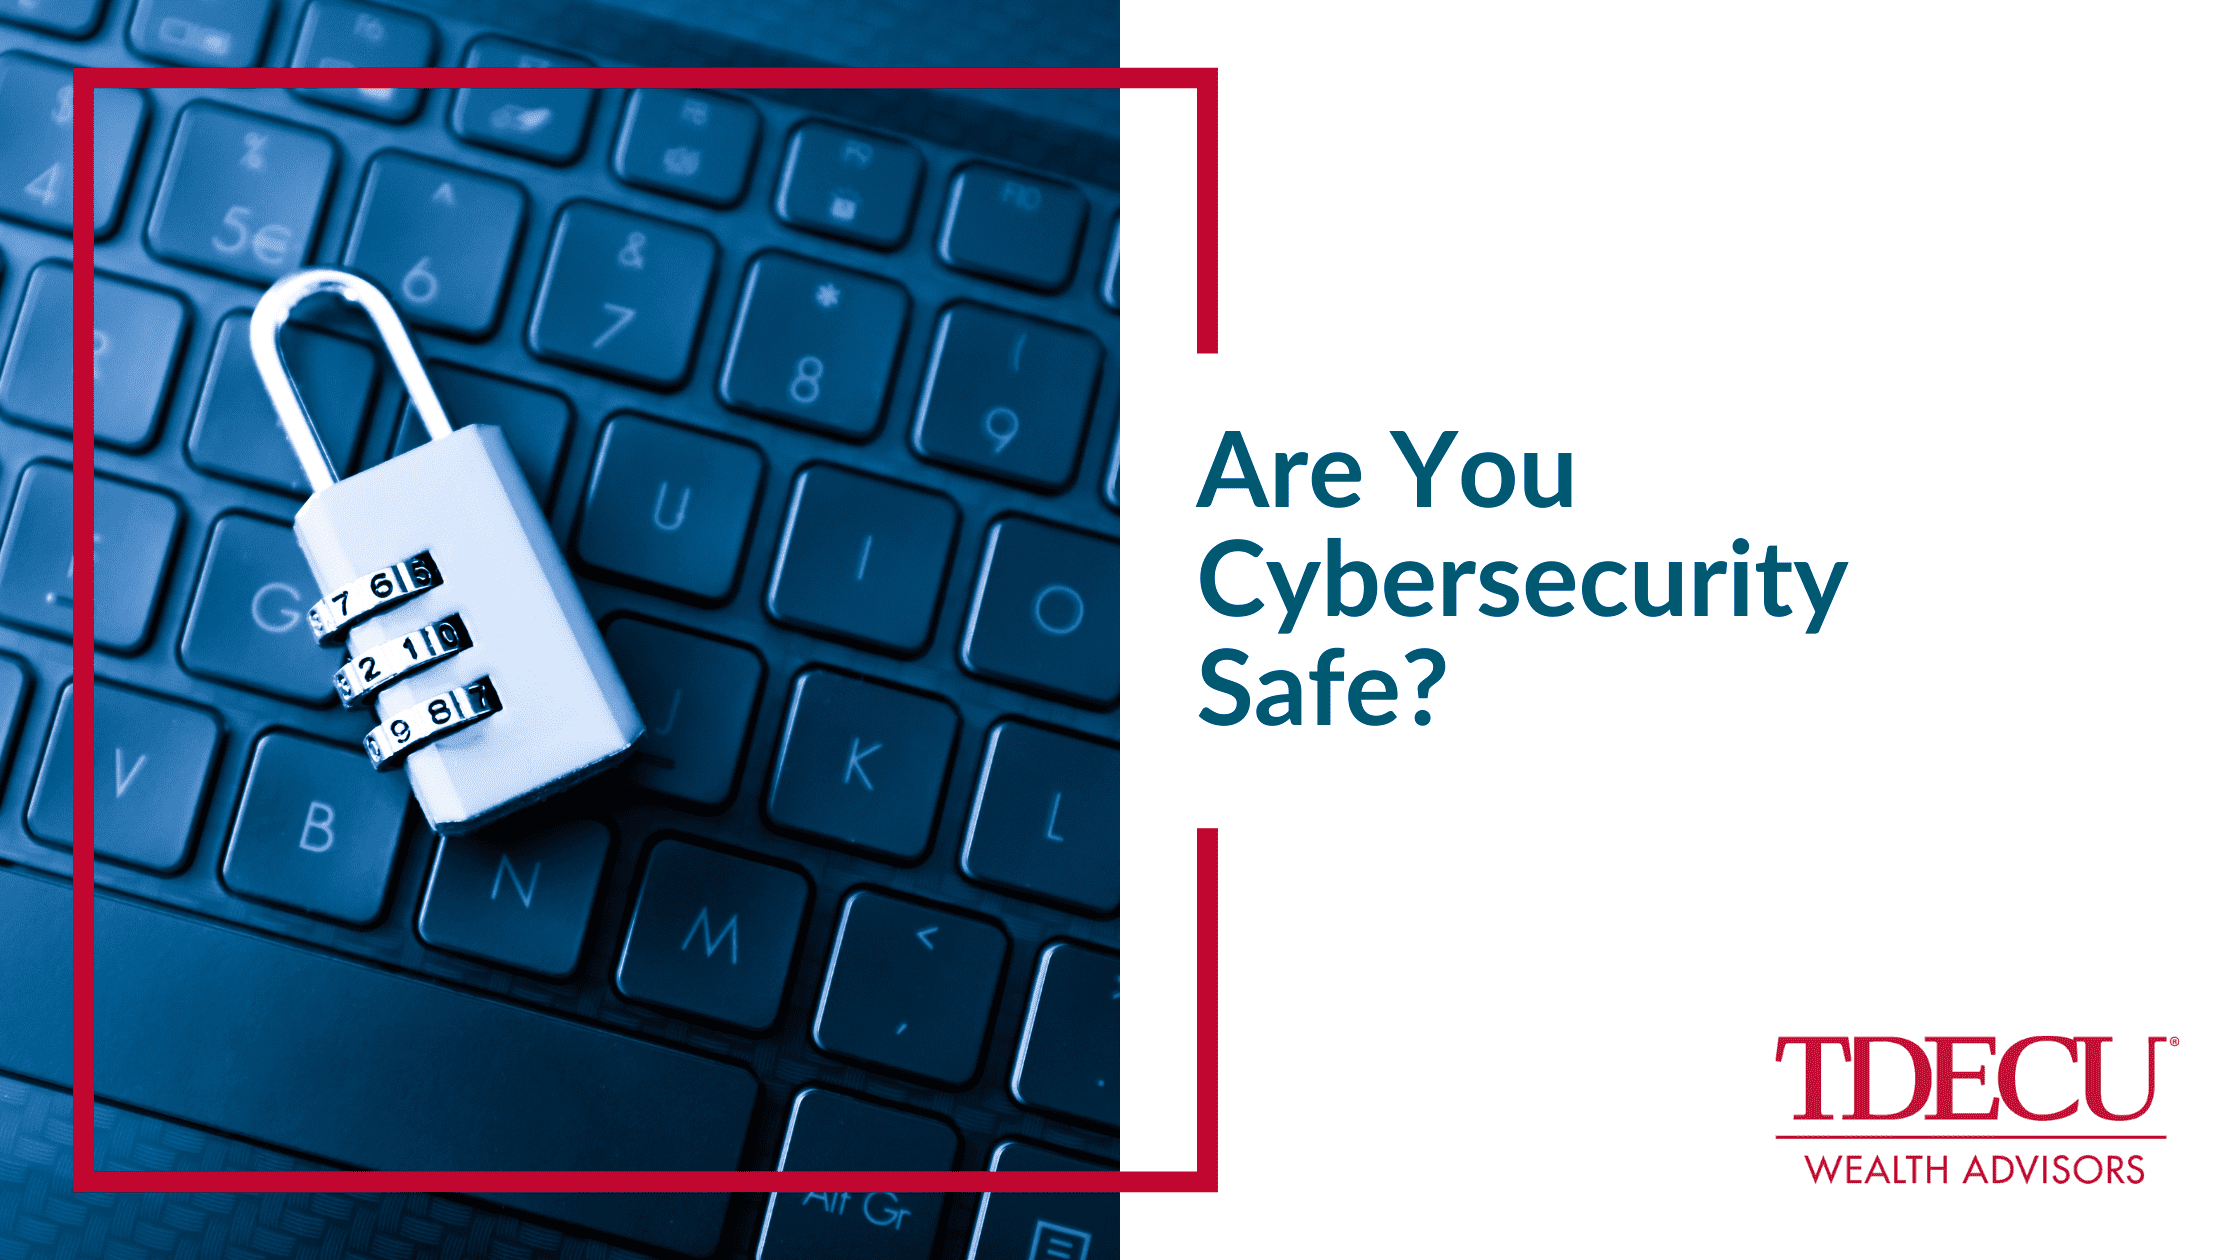 Are You Cybersecurity Safe?